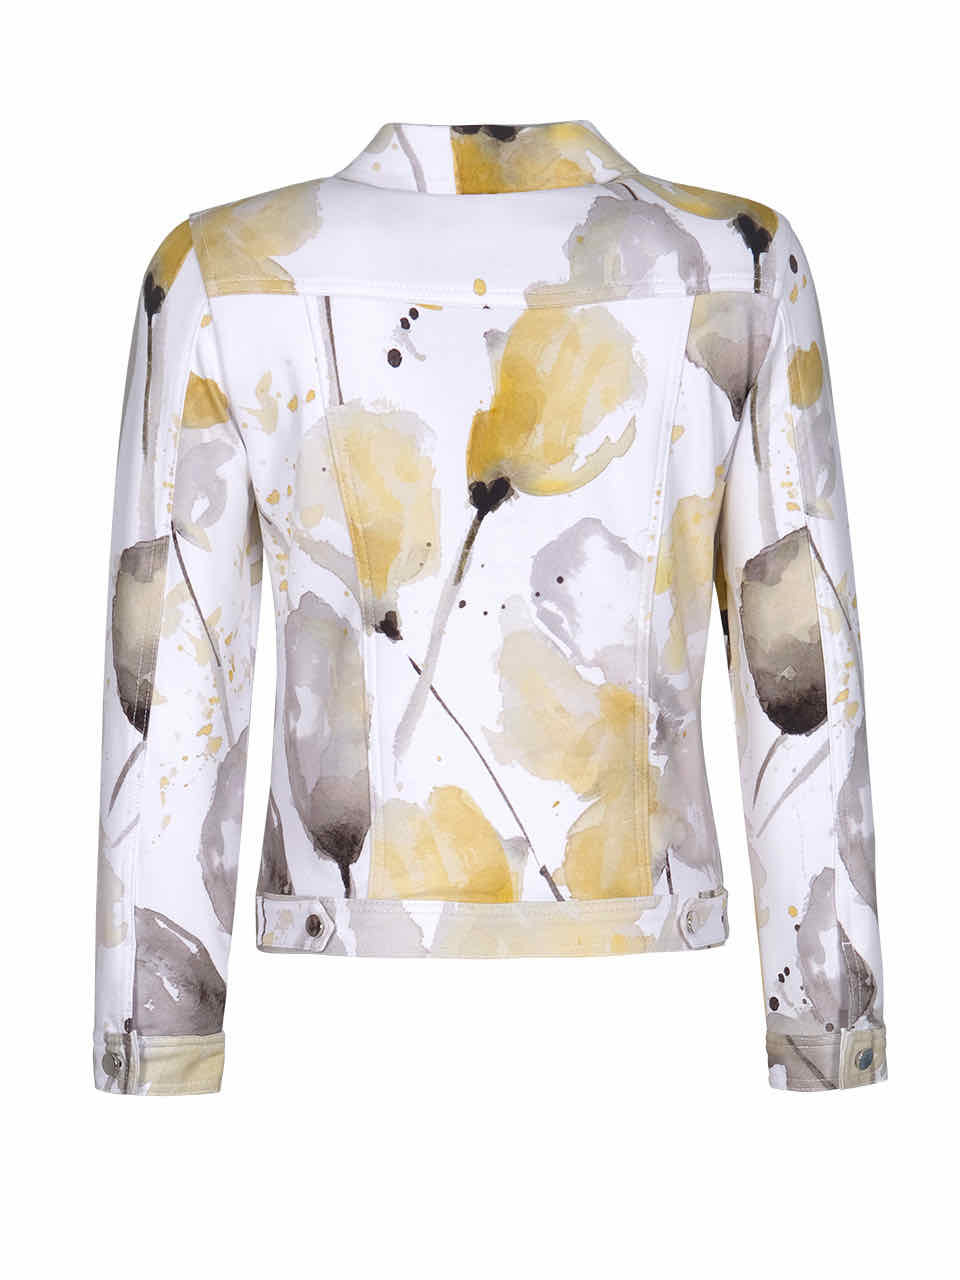 Simply Art Dolcezza: Floral Abstract 11 Art Soft Denim Jacket